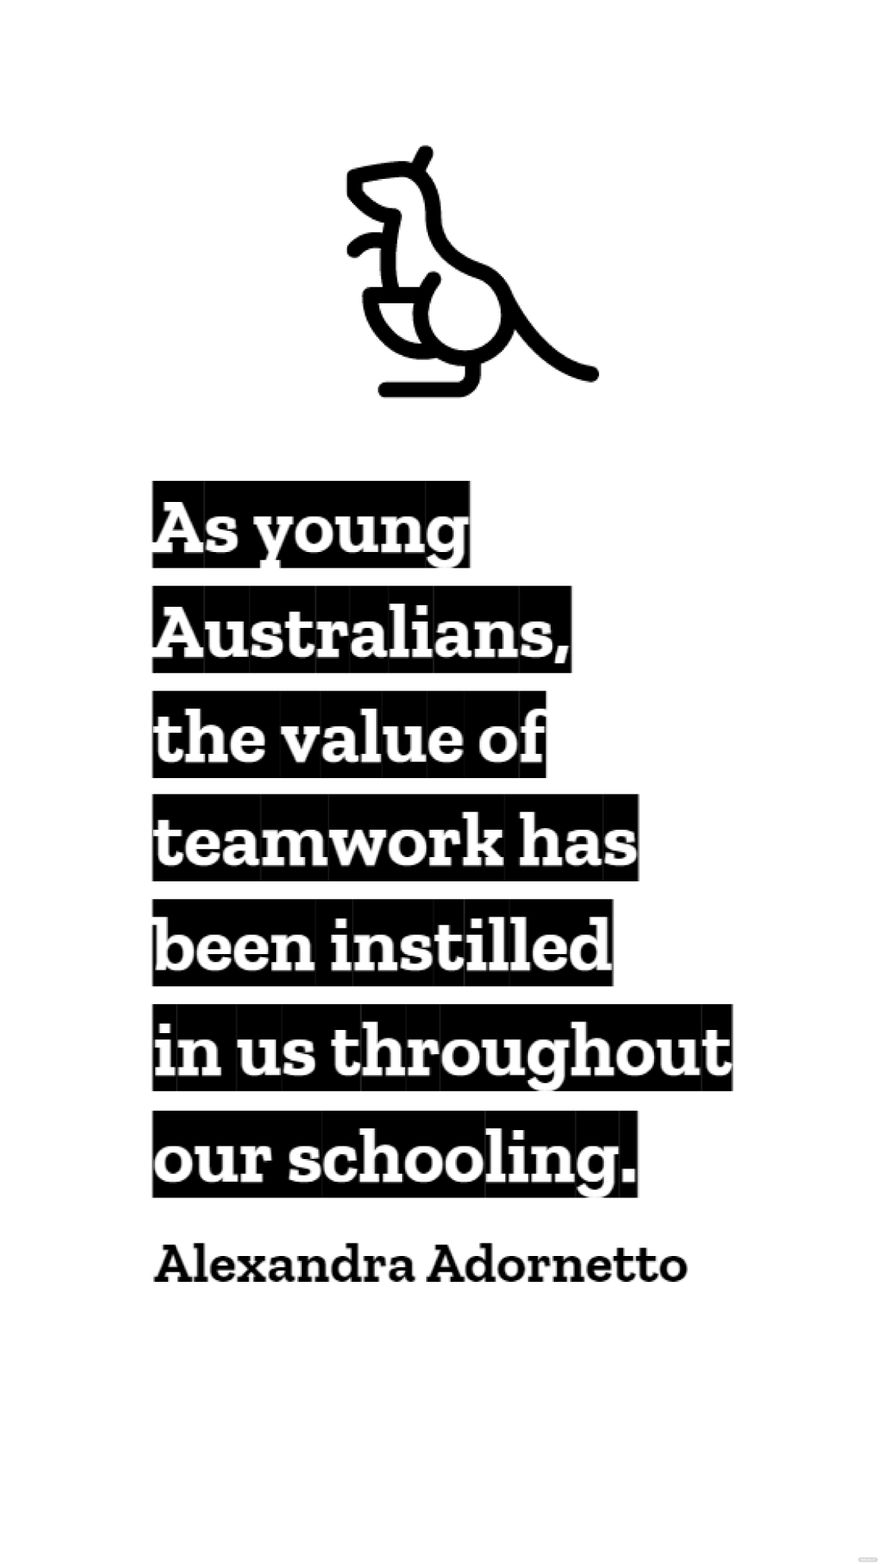 Alexandra Adornetto - As young Australians, the value of teamwork has been instilled in us throughout our schooling.